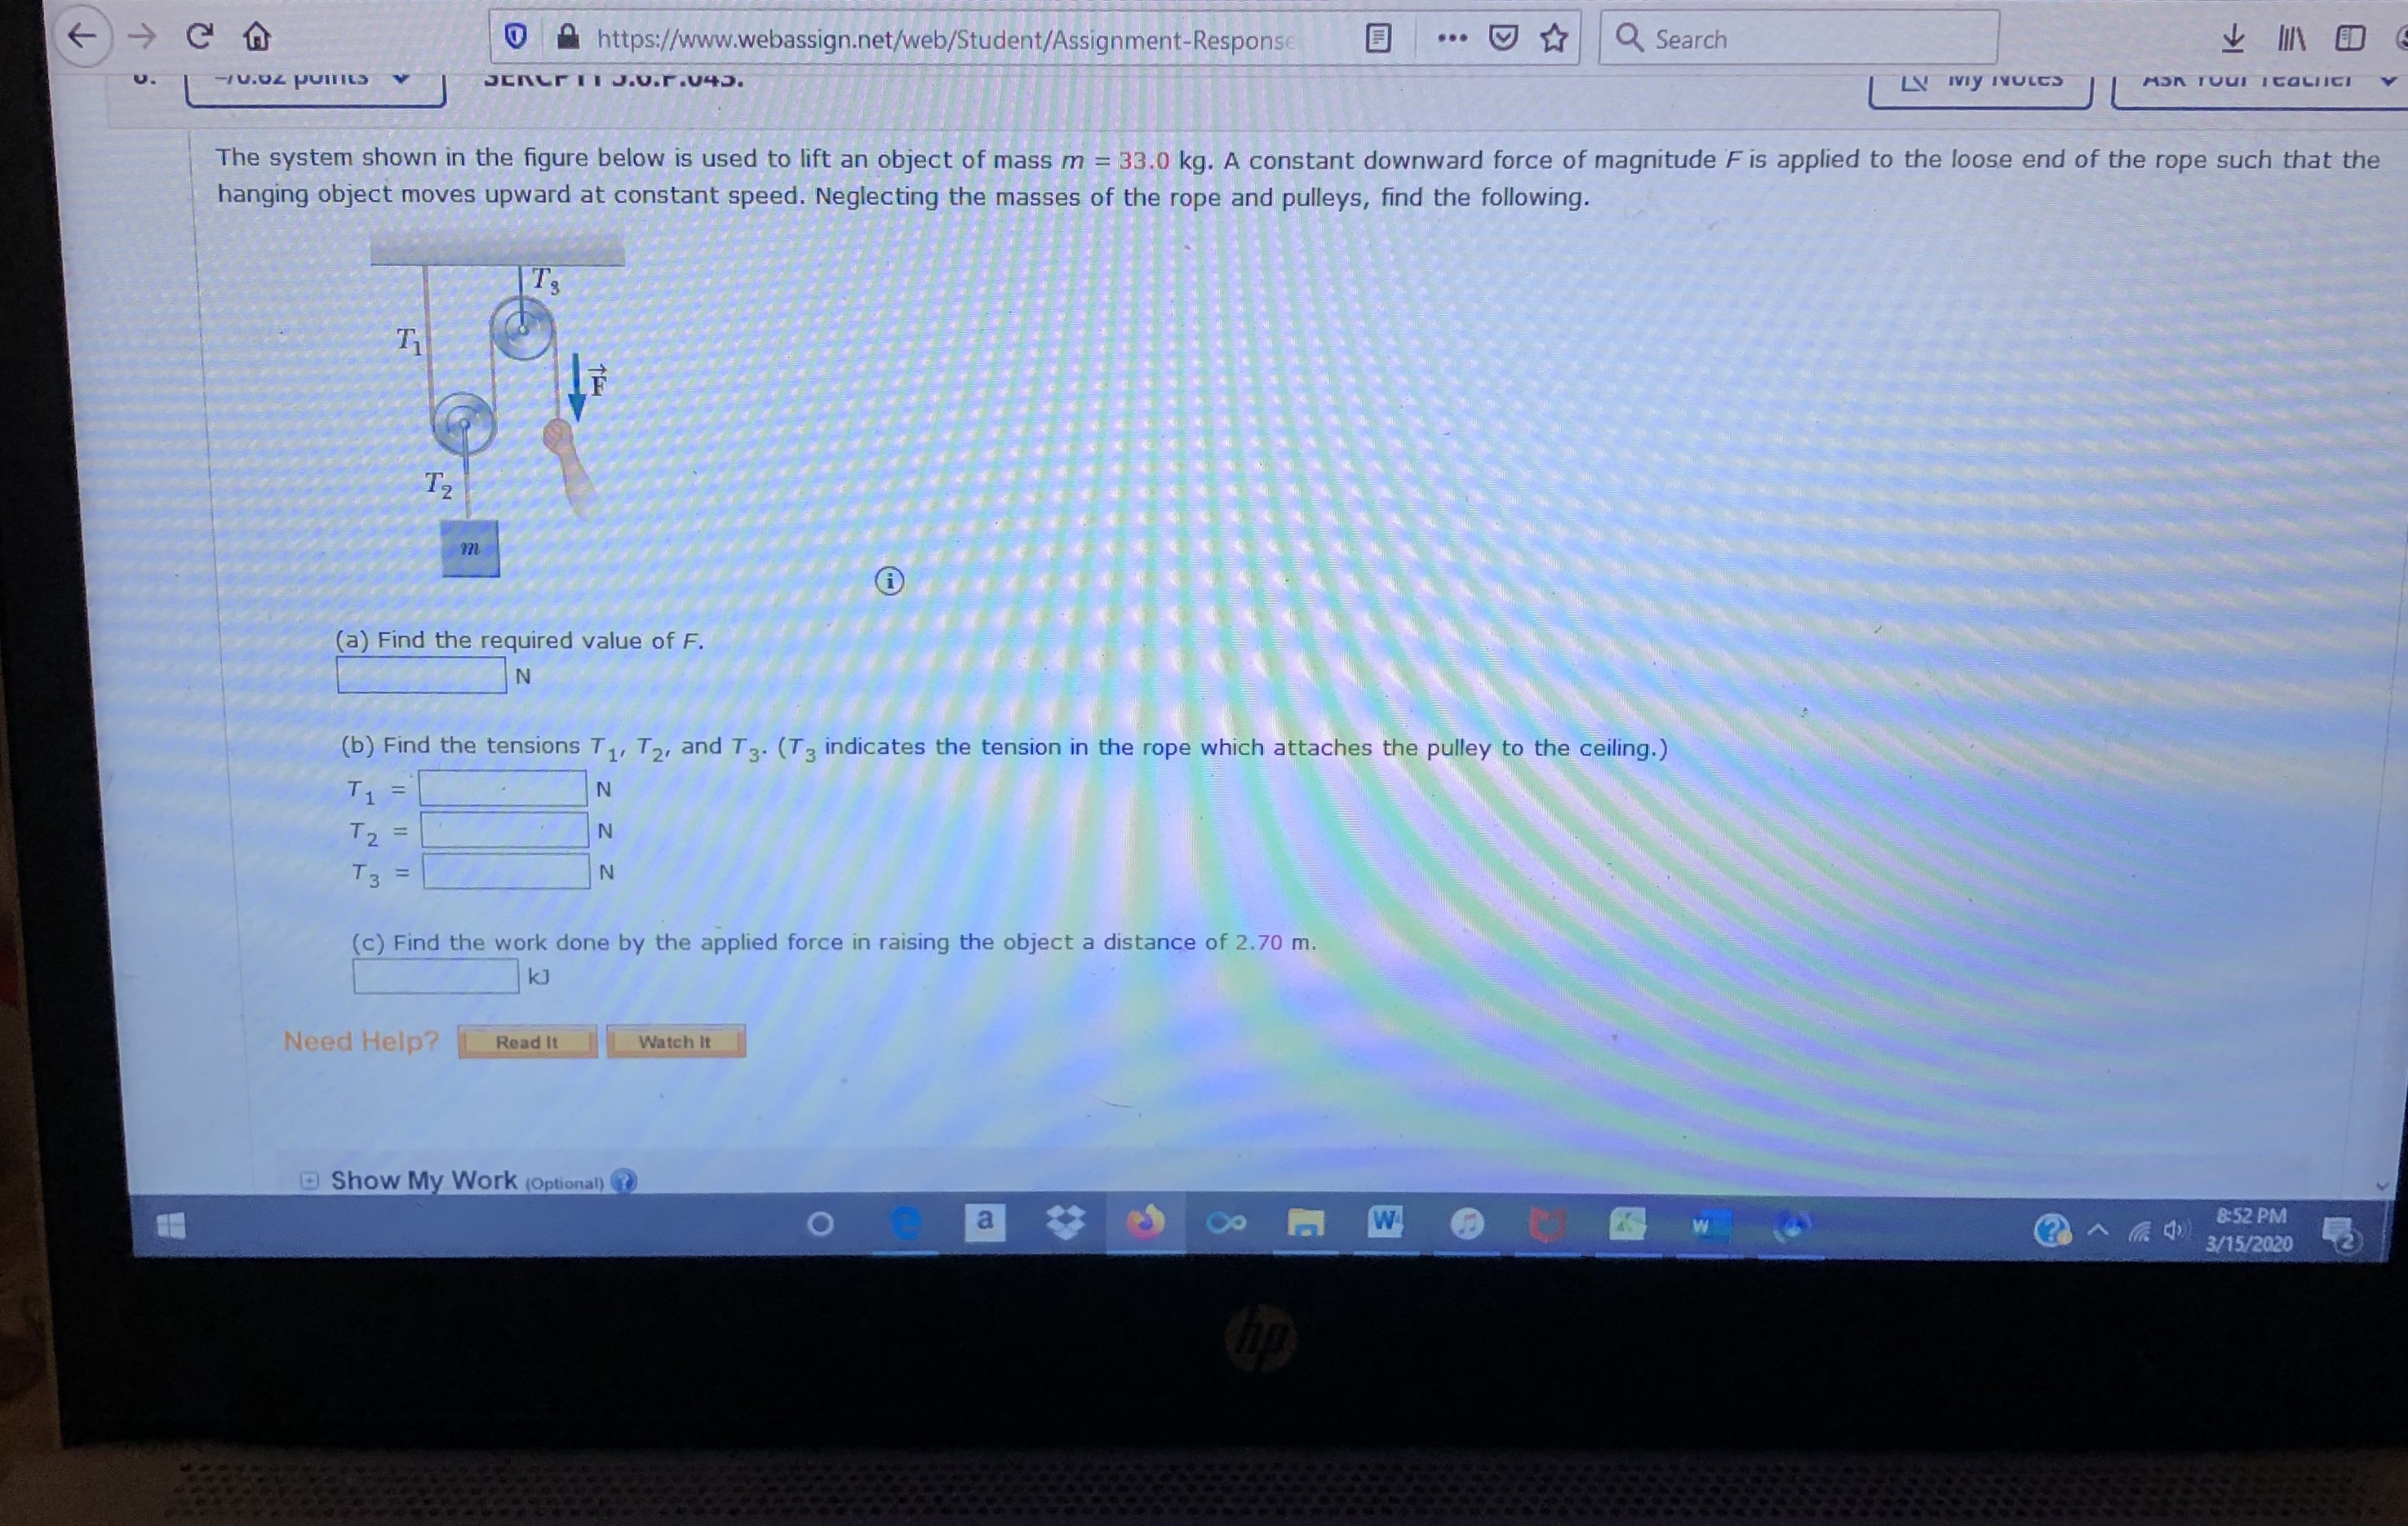 https://www.webassign.net/web/Student/Assignment-Response
Q Search
...
70.02 poIILS
JERC TI J.0.r.v45.
LV IVy IVULCS
ASK TOUI TtaciCT
The system shown in the figure below is used to lift an object of mass m = 33.0 kg. A constant downward force of magnitude F is applied to the loose end of the rope such that the
hanging object moves upward at constant speed. Neglecting the masses of the rope and pulleys, find the following.
|Ts
T1
T2
(a) Find the required value of F.
(b) Find the tensions T1, T2, and T3. (T3 indicates the tension in the rope which attaches the pulley to the ceiling.)
T2
Тз
N.
%3D
(c) Find the work done by the applied force in raising the object a distance of 2.70 m.
kJ
Need Help?
Watch It
Read It
Show My Work (Optional)
a
8:52 PM
3/15/2020
